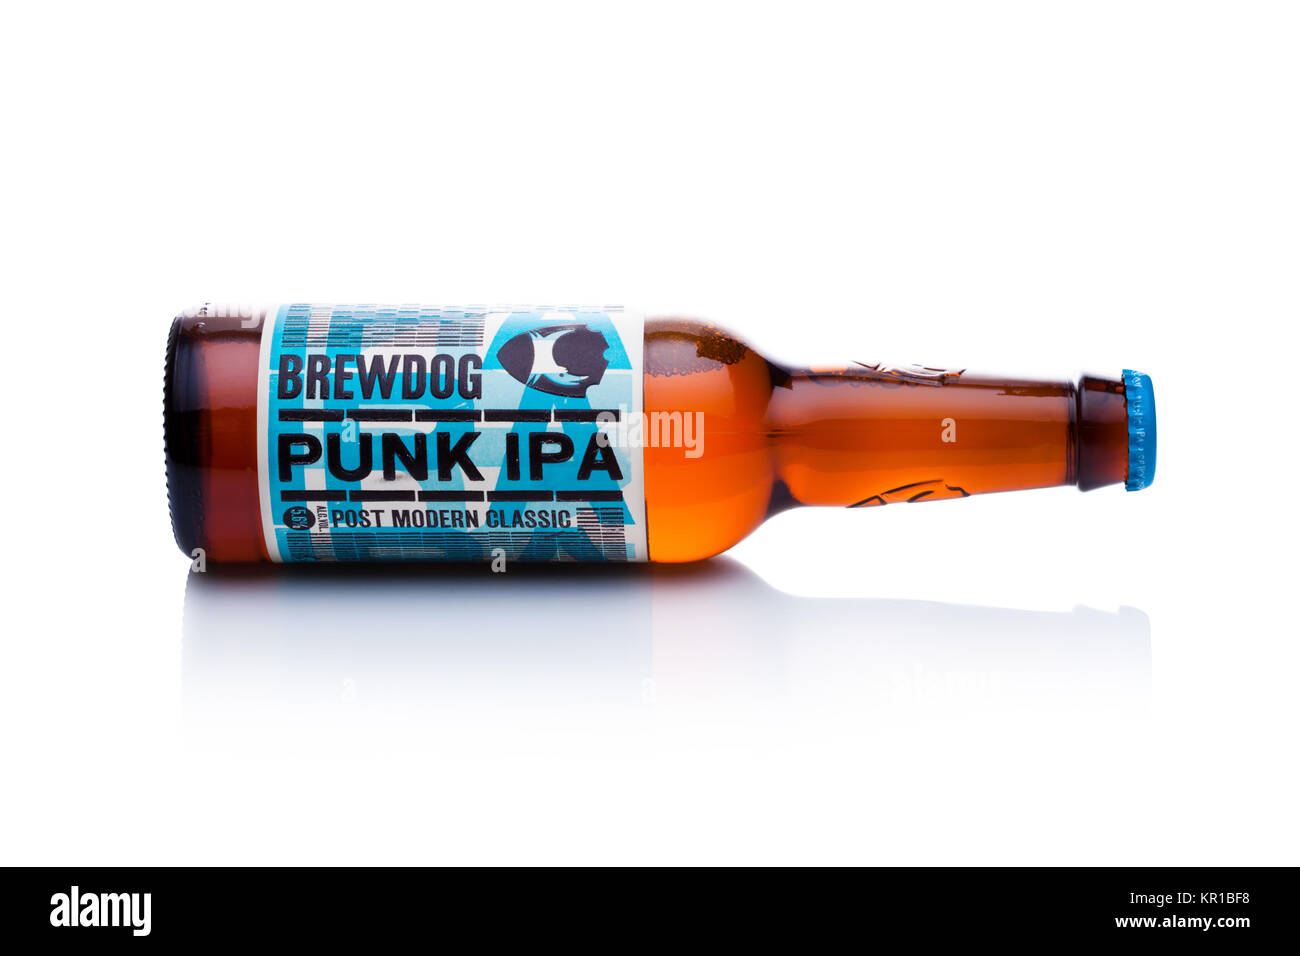 LONDON, UK - DECEMBER 15, 2017: Bottle of Punk Ipa post modern classic, from the Brewdog brewery on white background. Stock Photo